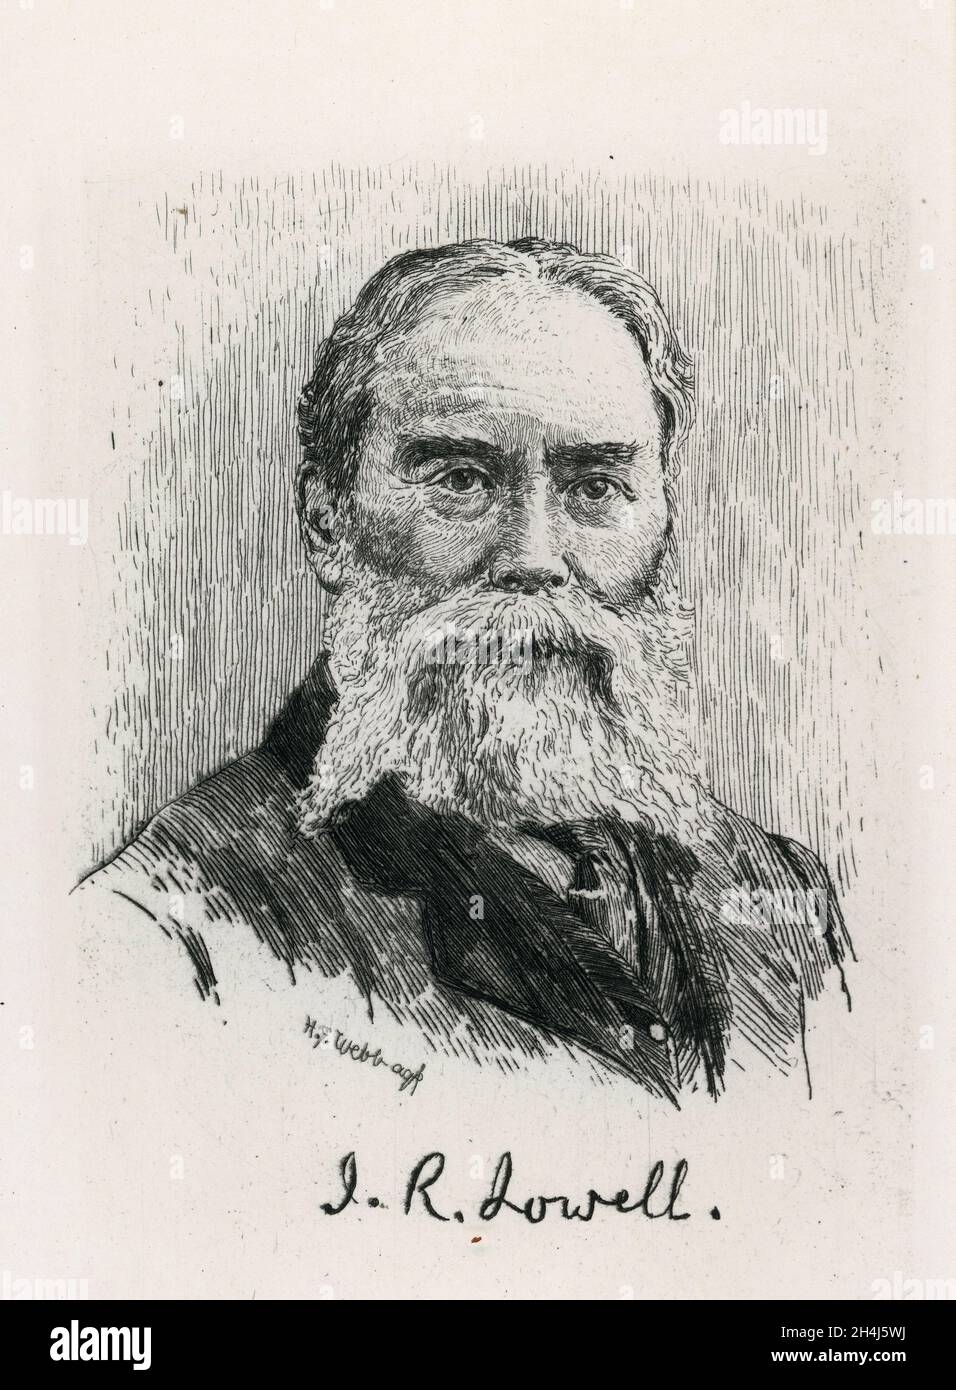 Vintage illustration portrait of James Russell Lowell American Romantic poet, critic, editor, and diplomat. Stock Photo